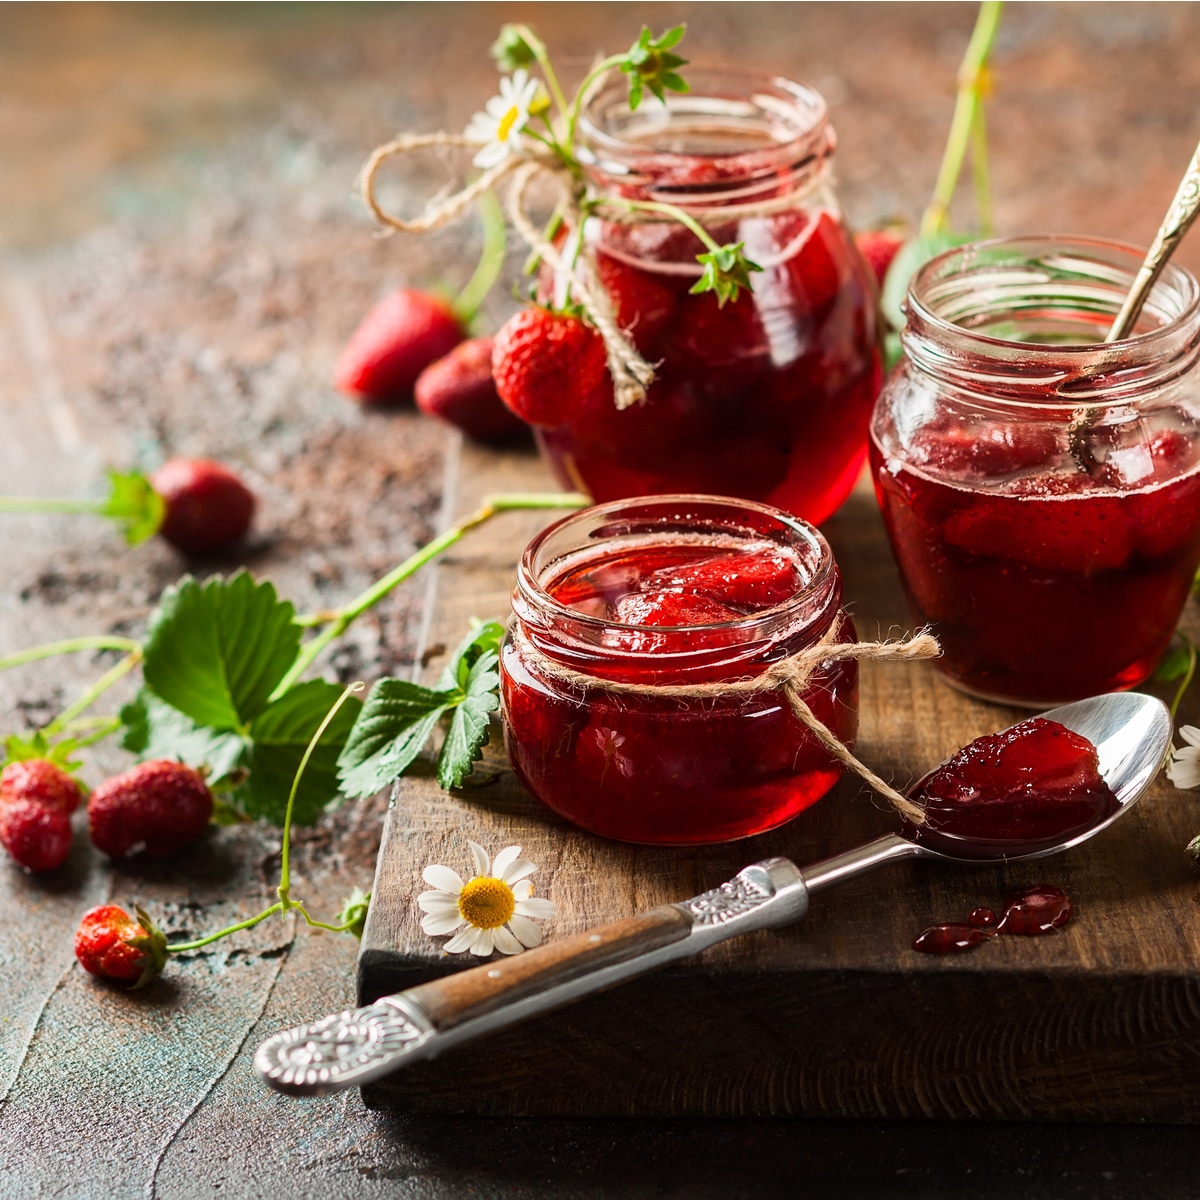 Jams, Jellies, Preserves: What's the Difference? - My Northern Garden